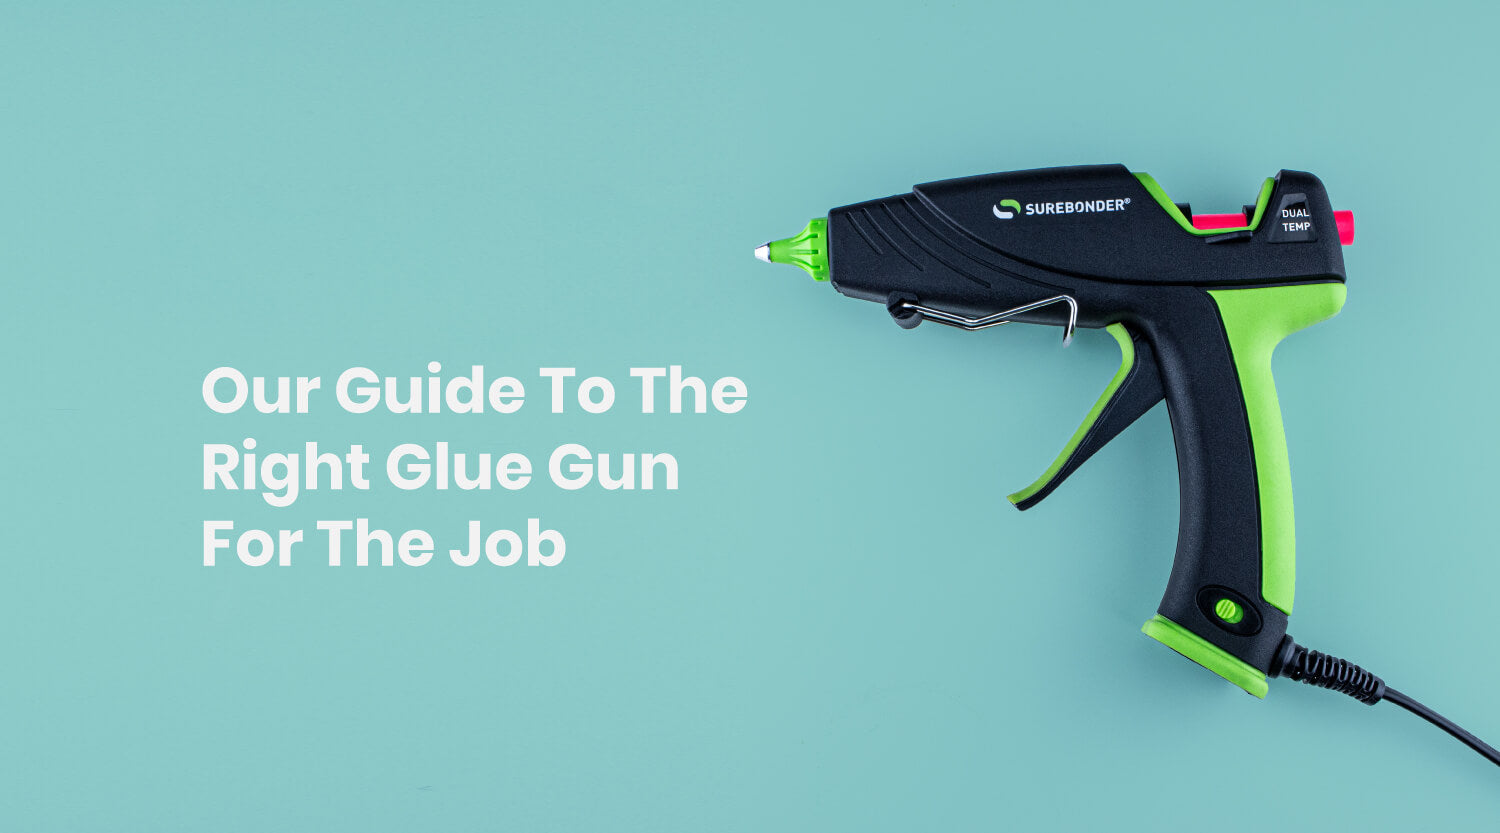 Our Guide to the Right Glue Gun For The Job